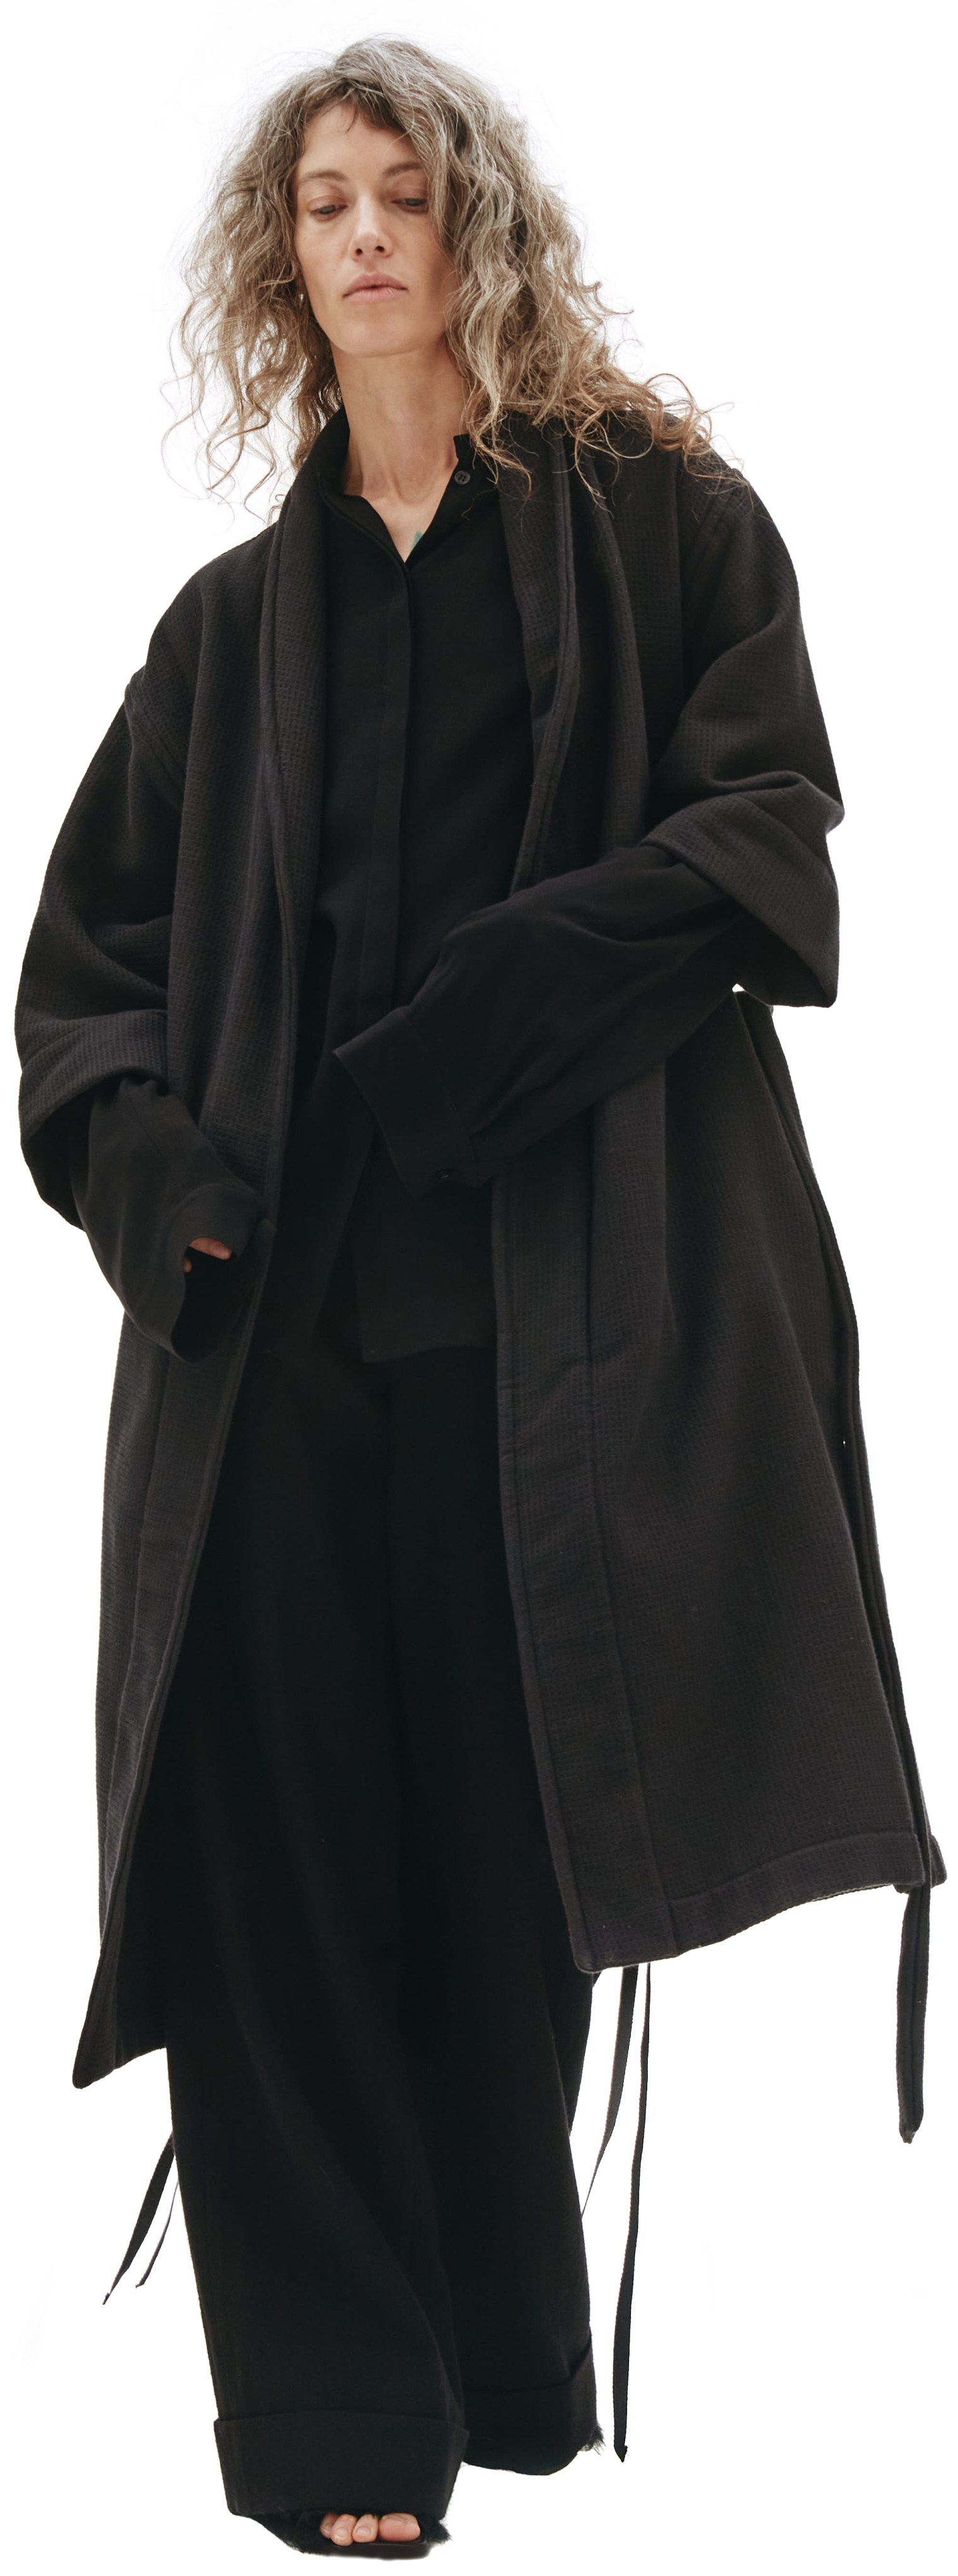 Fear of God Waffle Cotton Robe in black